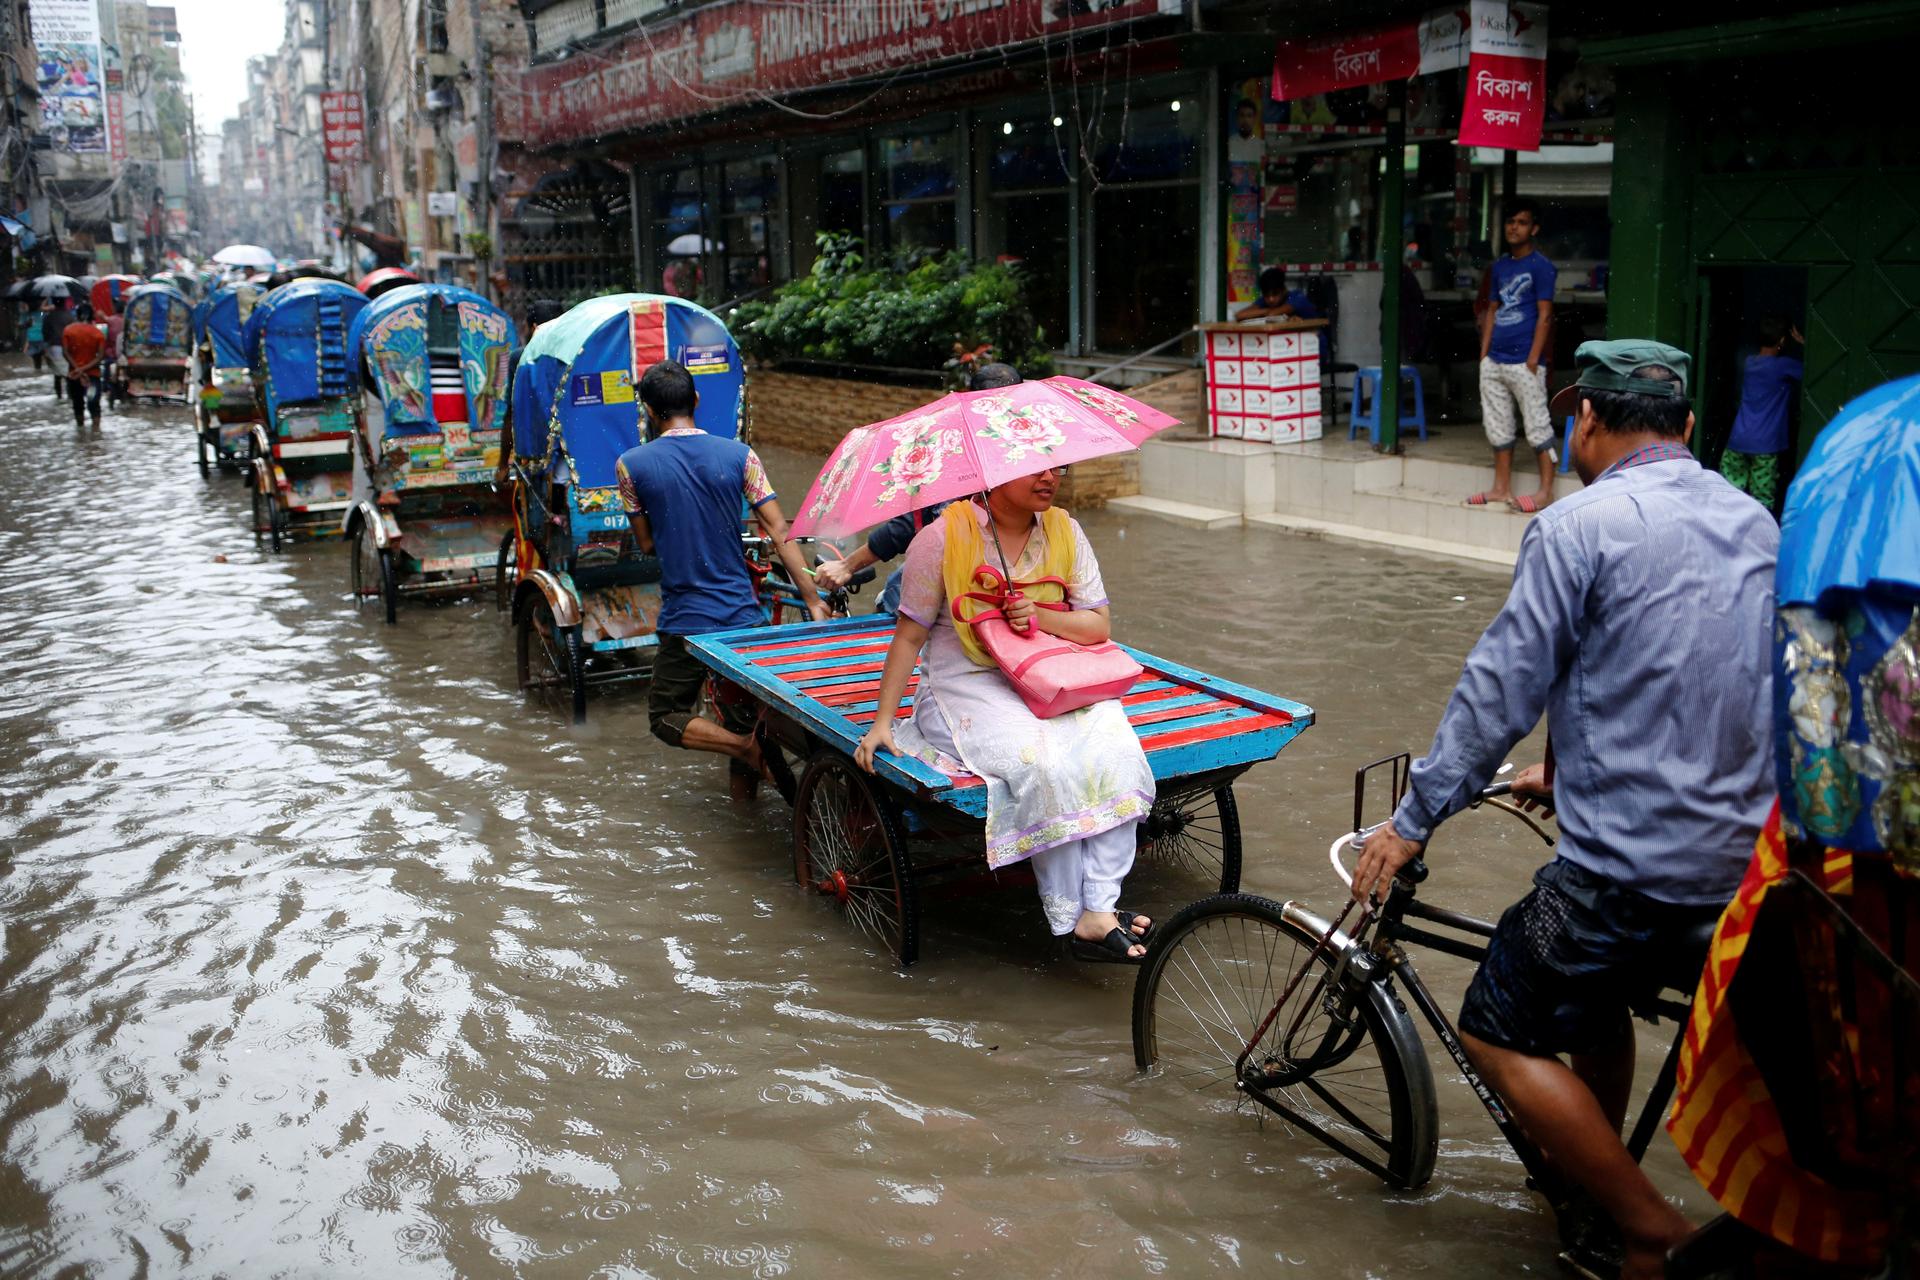 Commuters ride on rickshaws as streets are flooded due to heavy monsoon rains in Dhaka.